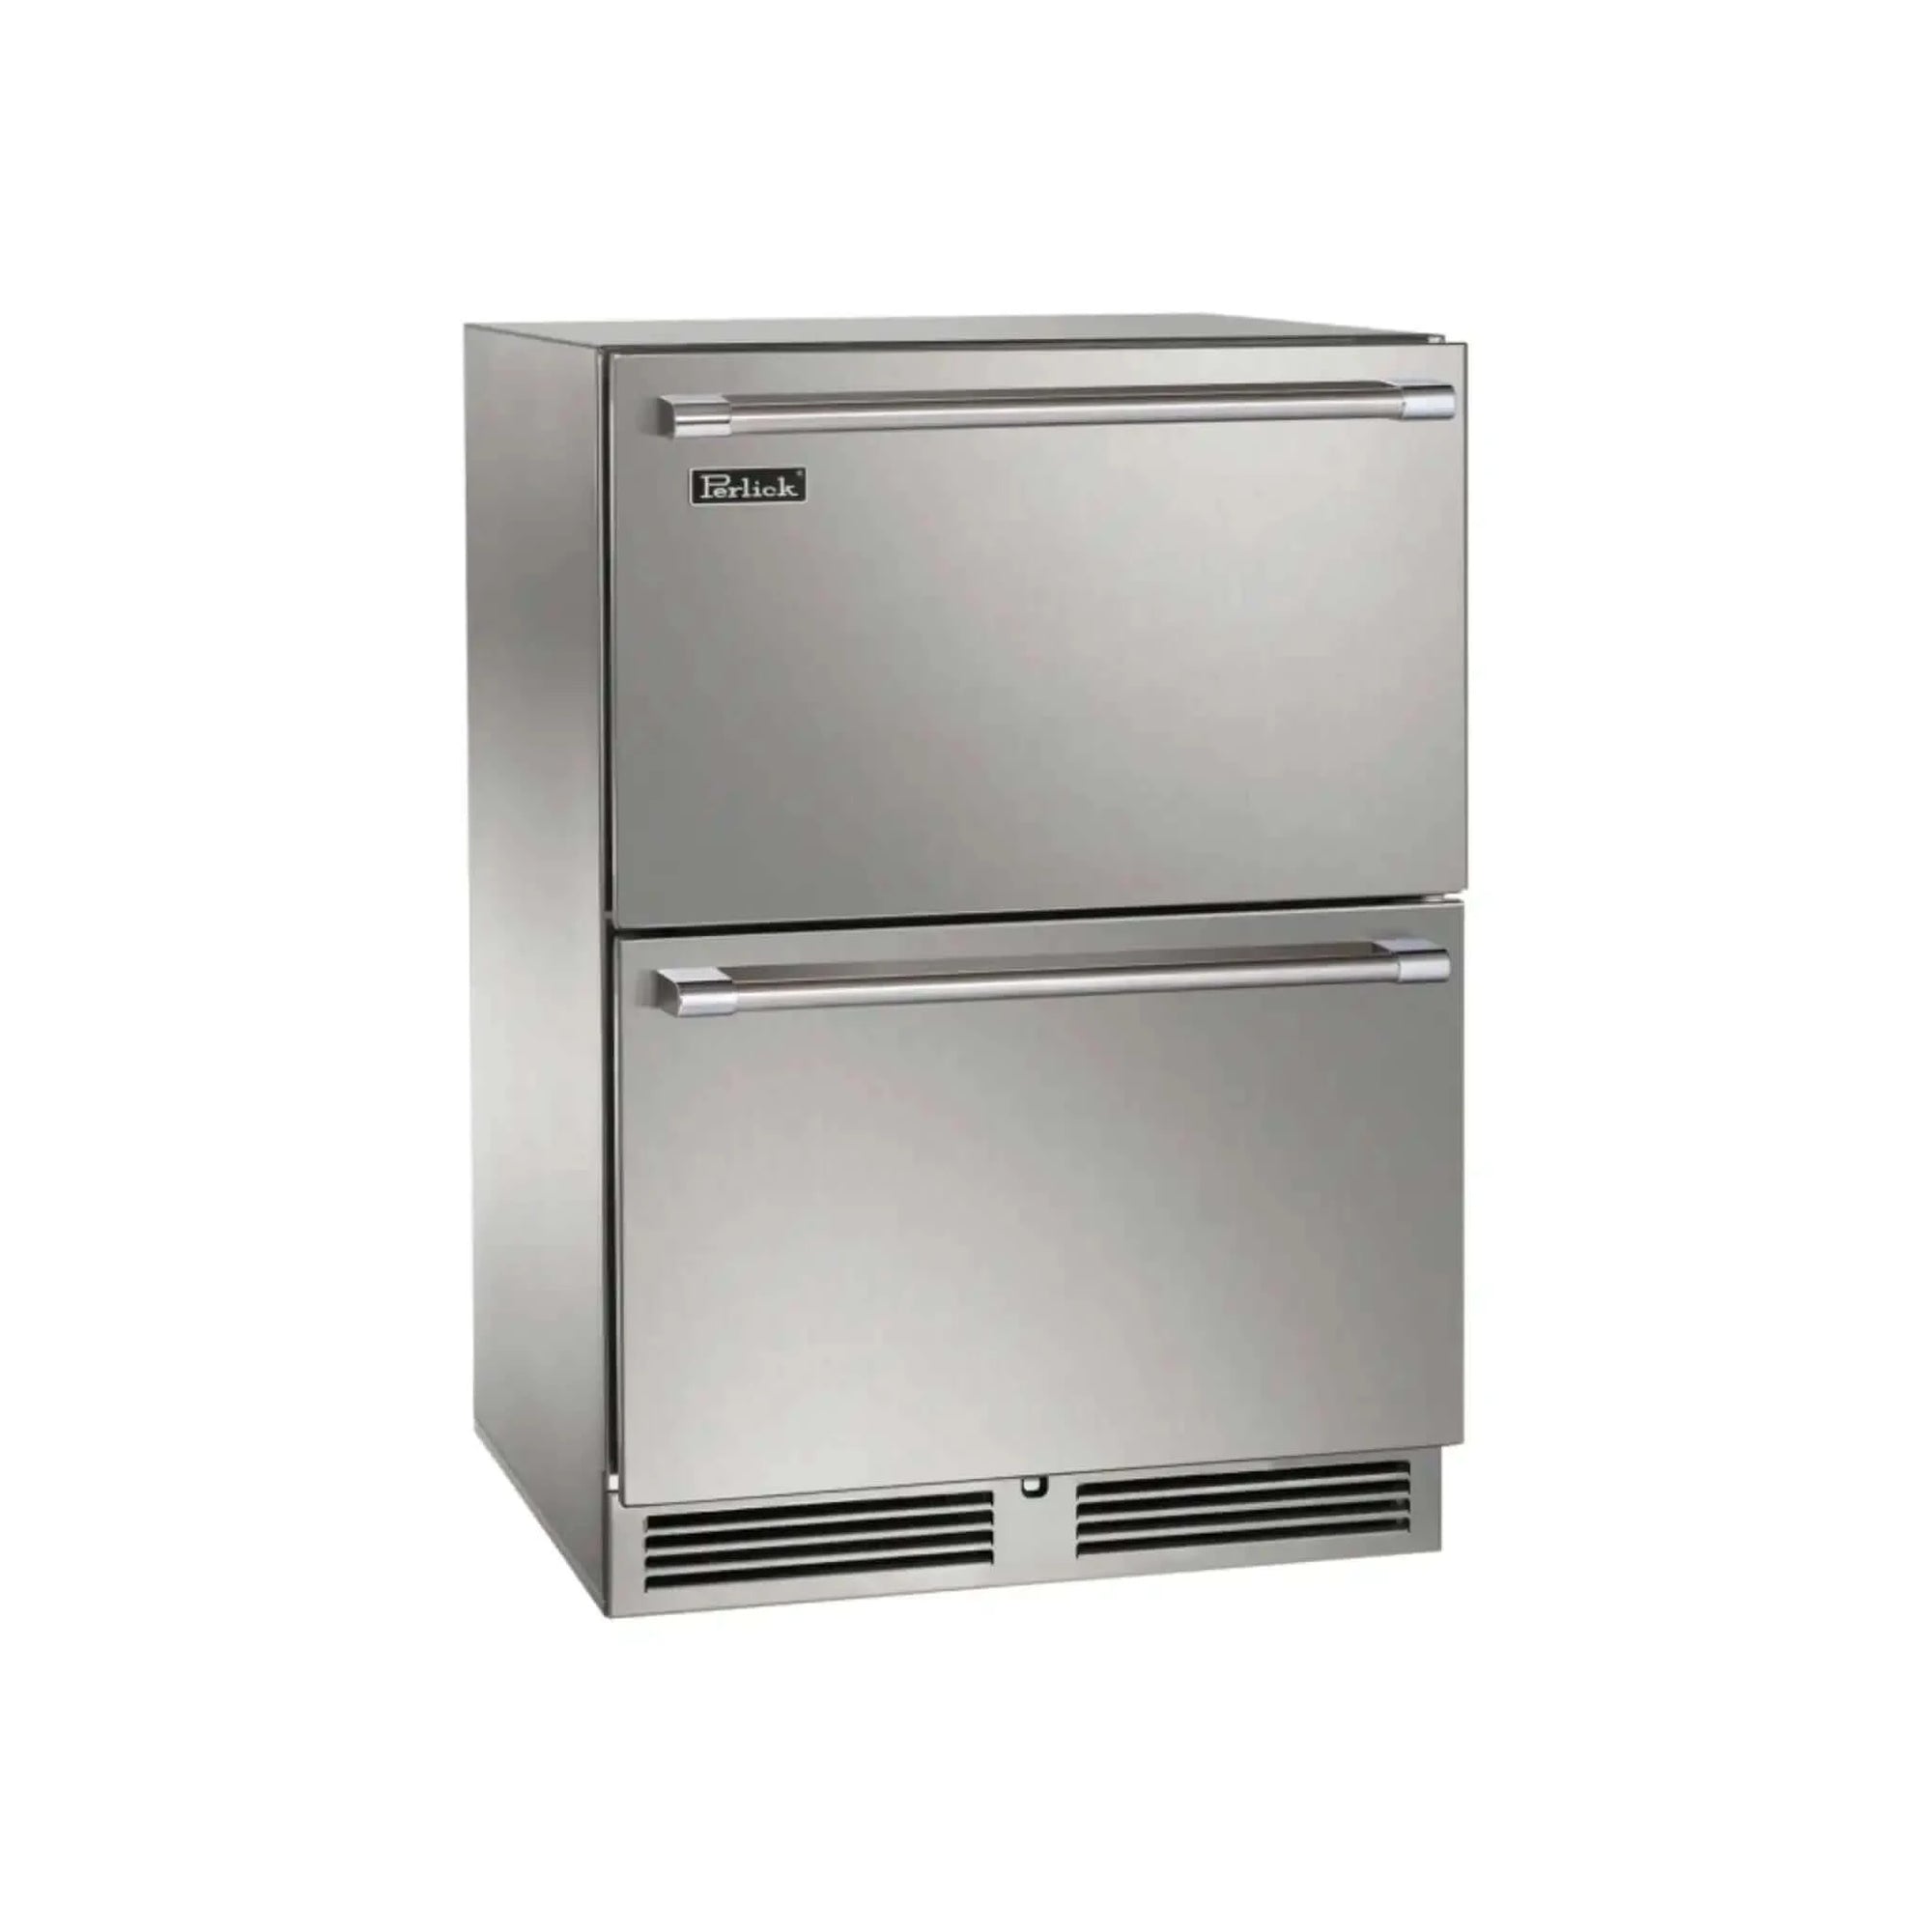 Perlick 24" Signature Series Outdoor Refrigerator Drawers with lock - HP24RO